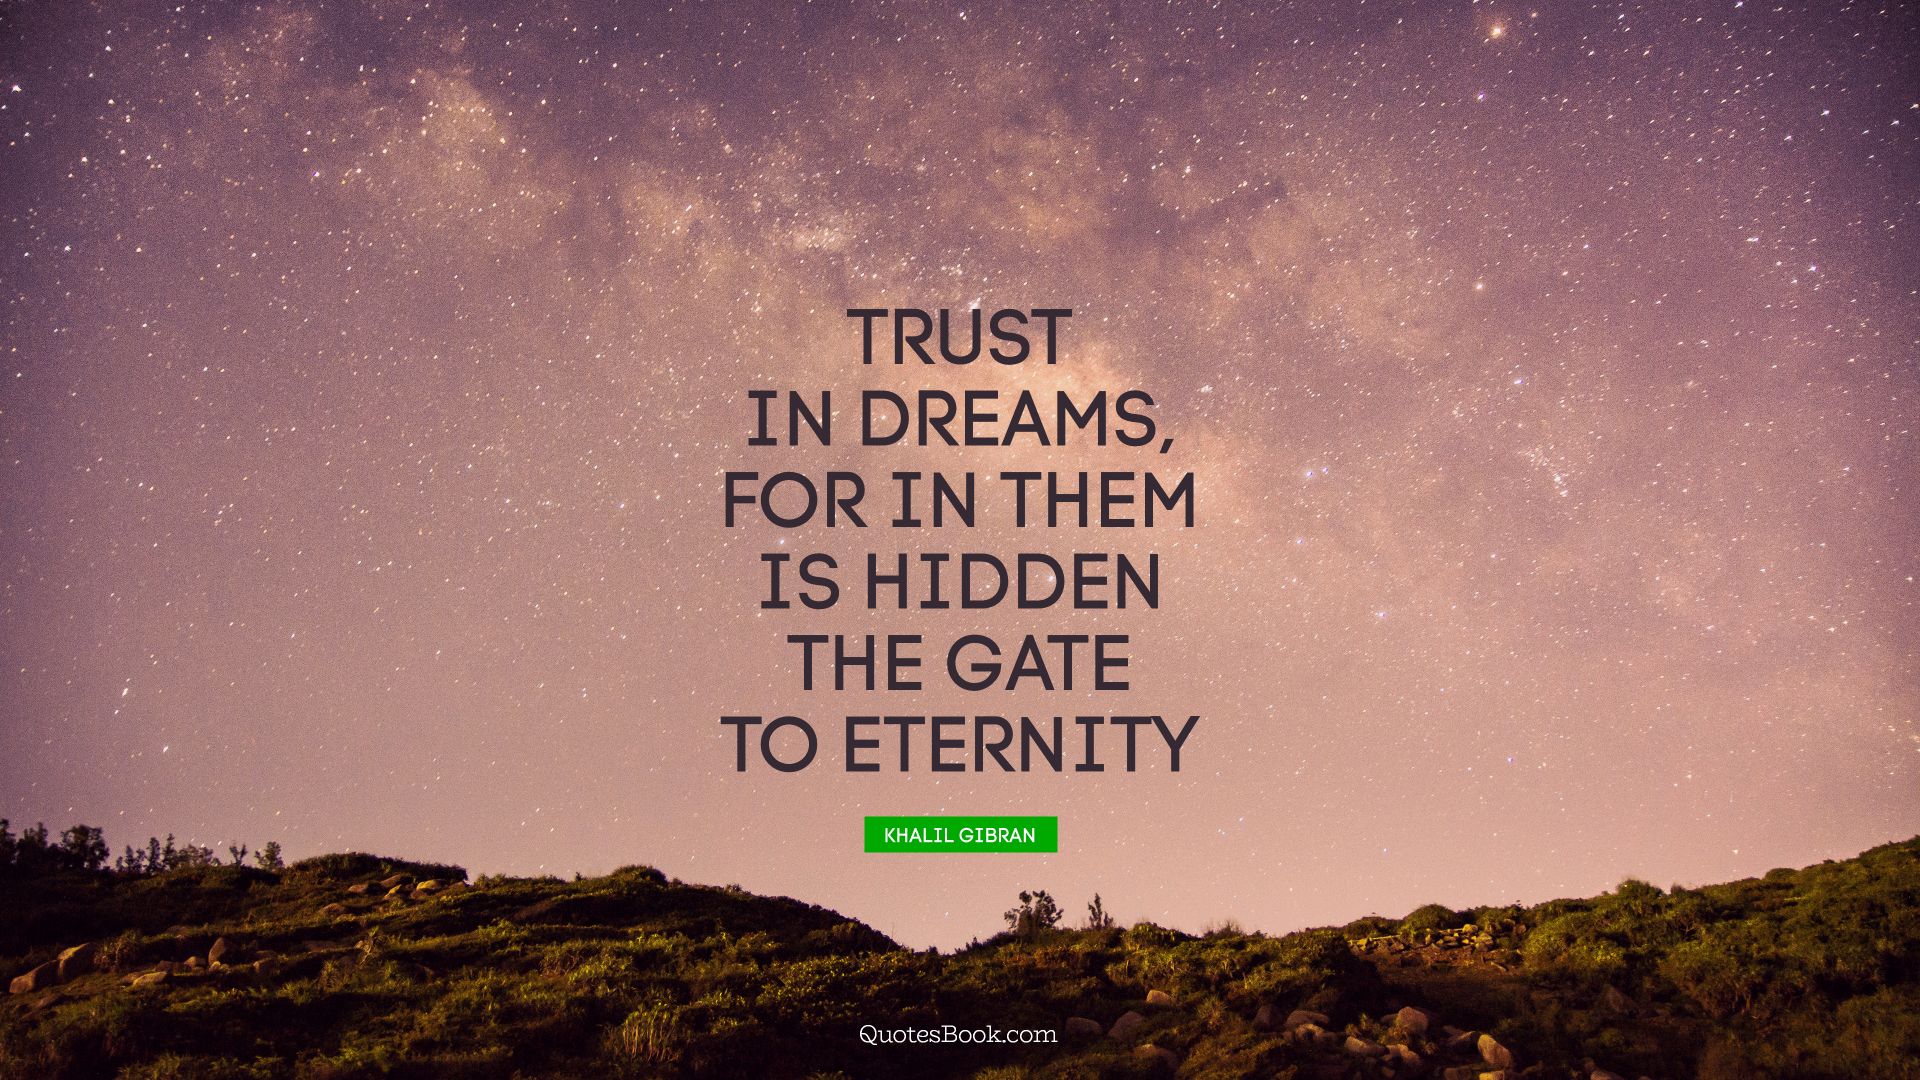 Trust in dreams, for in them is hidden the gate to eternity. - Quote by Khalil Gibran